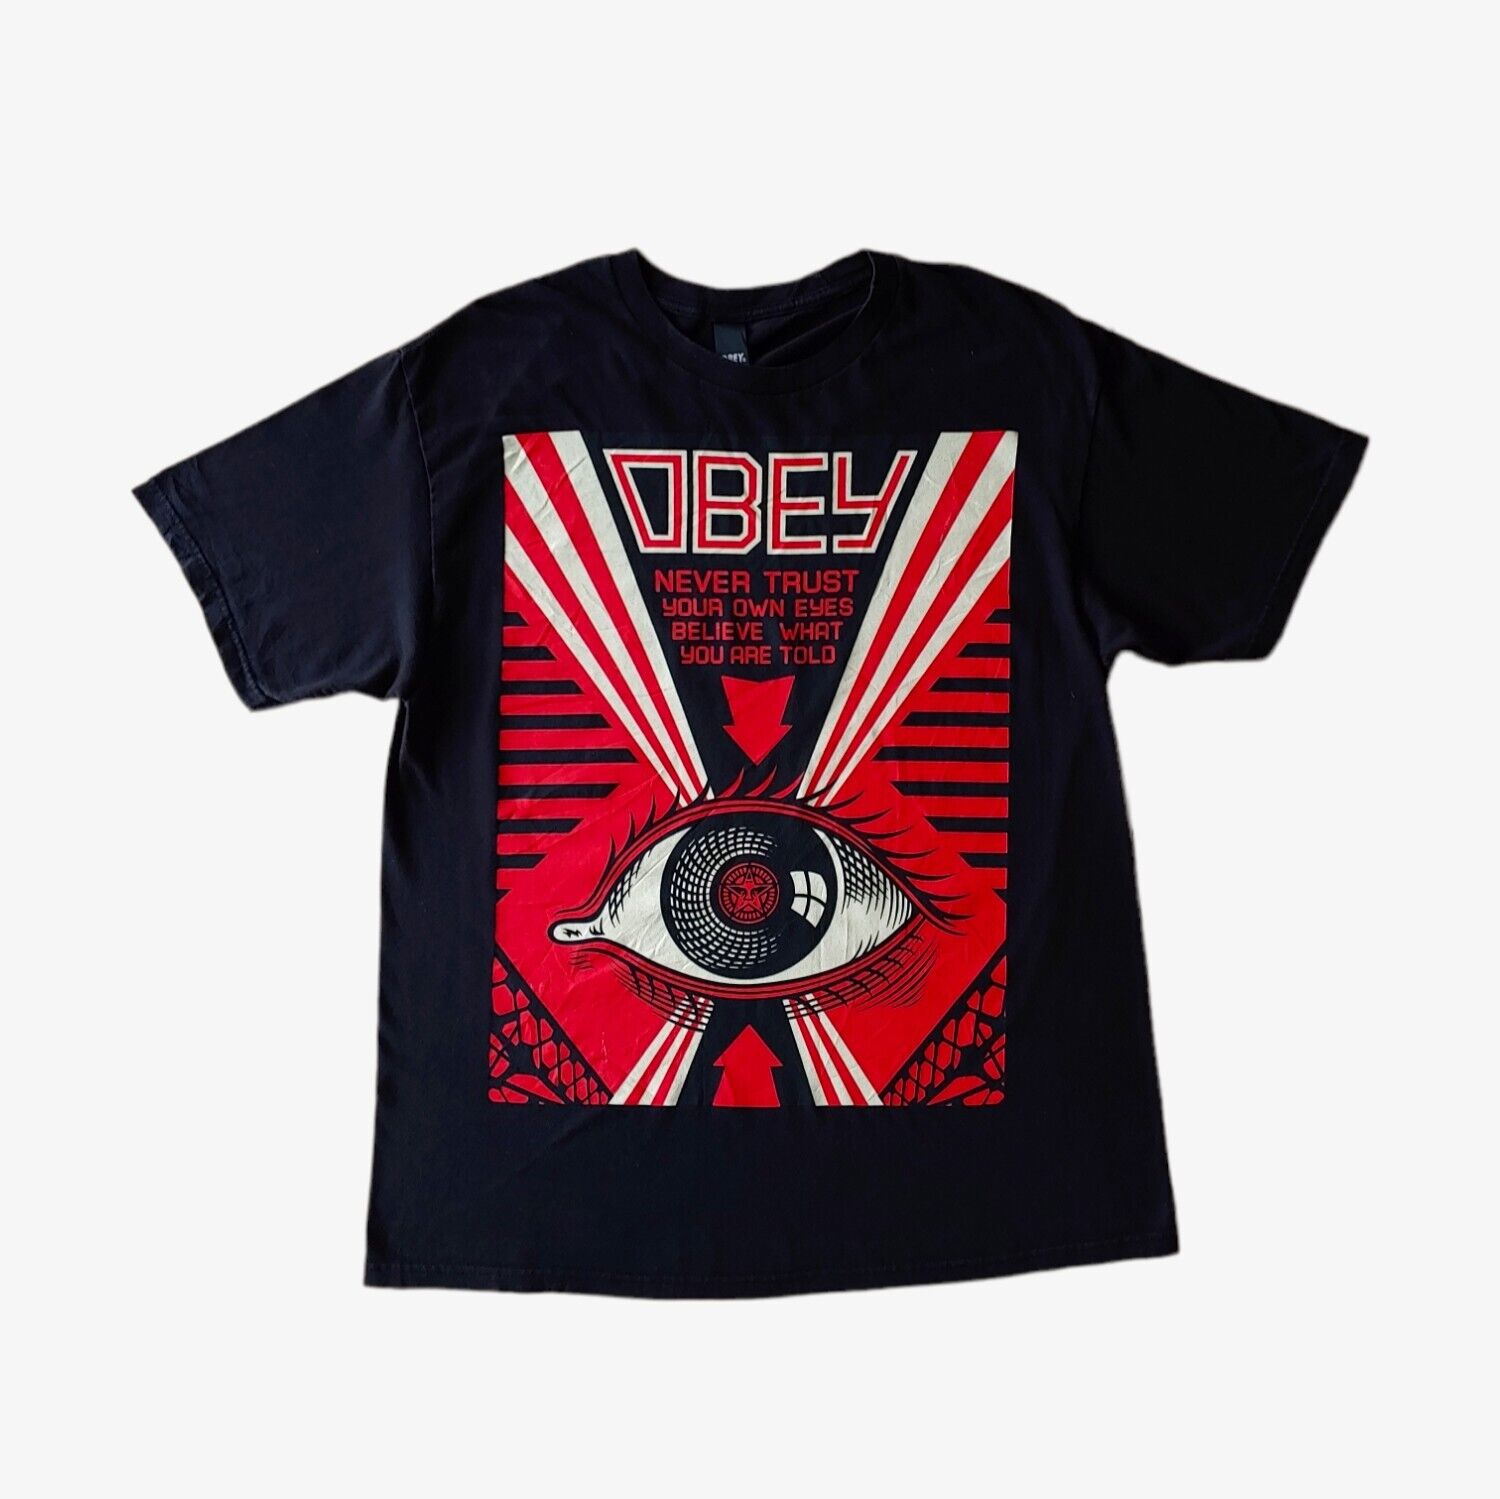 Vintage Y2K Obey Never Trust Your Own Eyes Believe What You Are Told Top T-Shirt - Casspios Dream